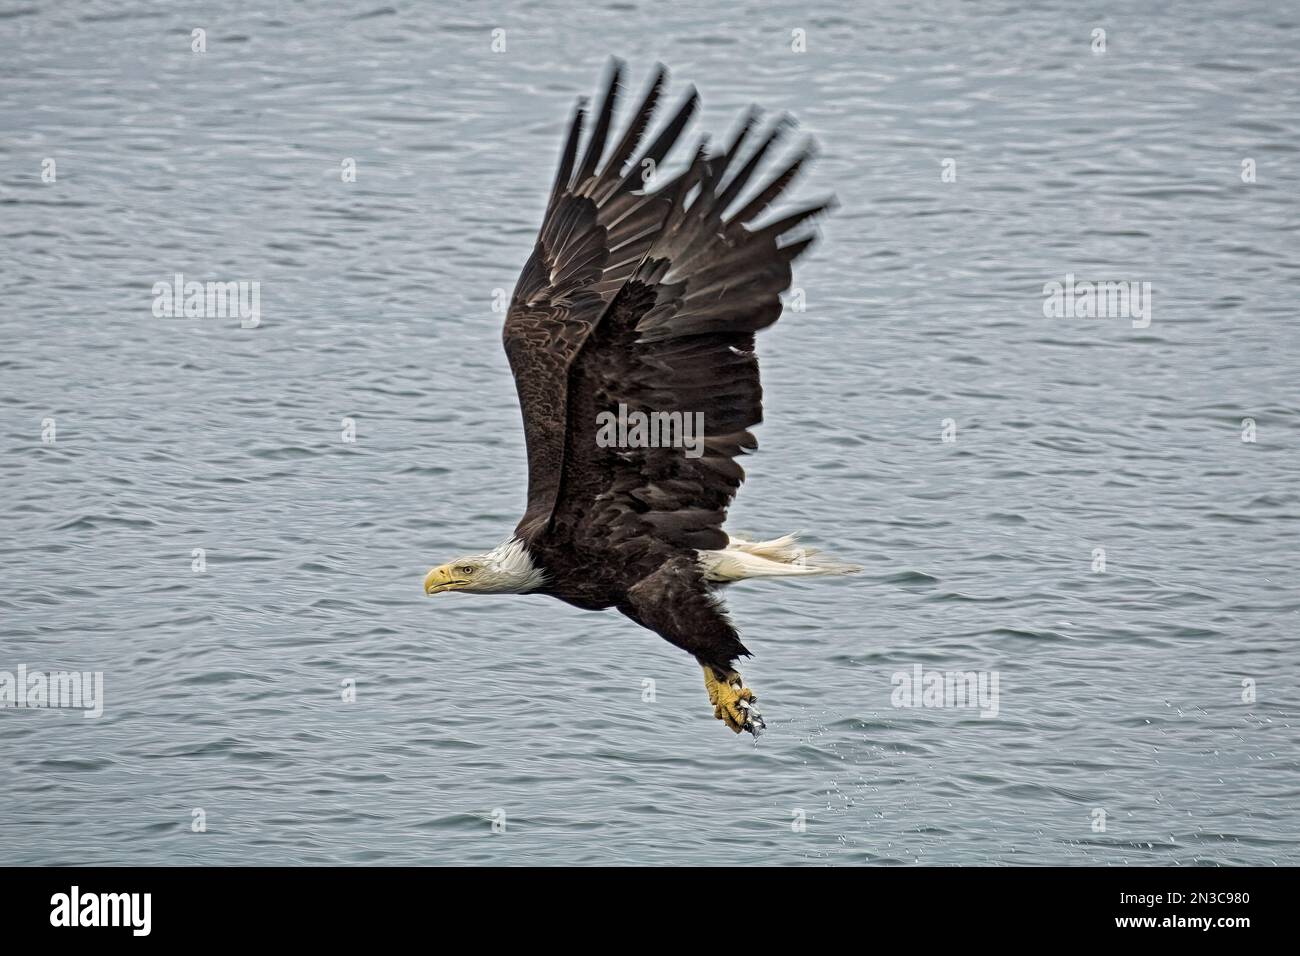 A bald eagle (Haliaeetus leucocephalus alascanus) in flight catches a fish with its talons. Their wingspans measure 7½ ft. The average weight is 10... Stock Photo